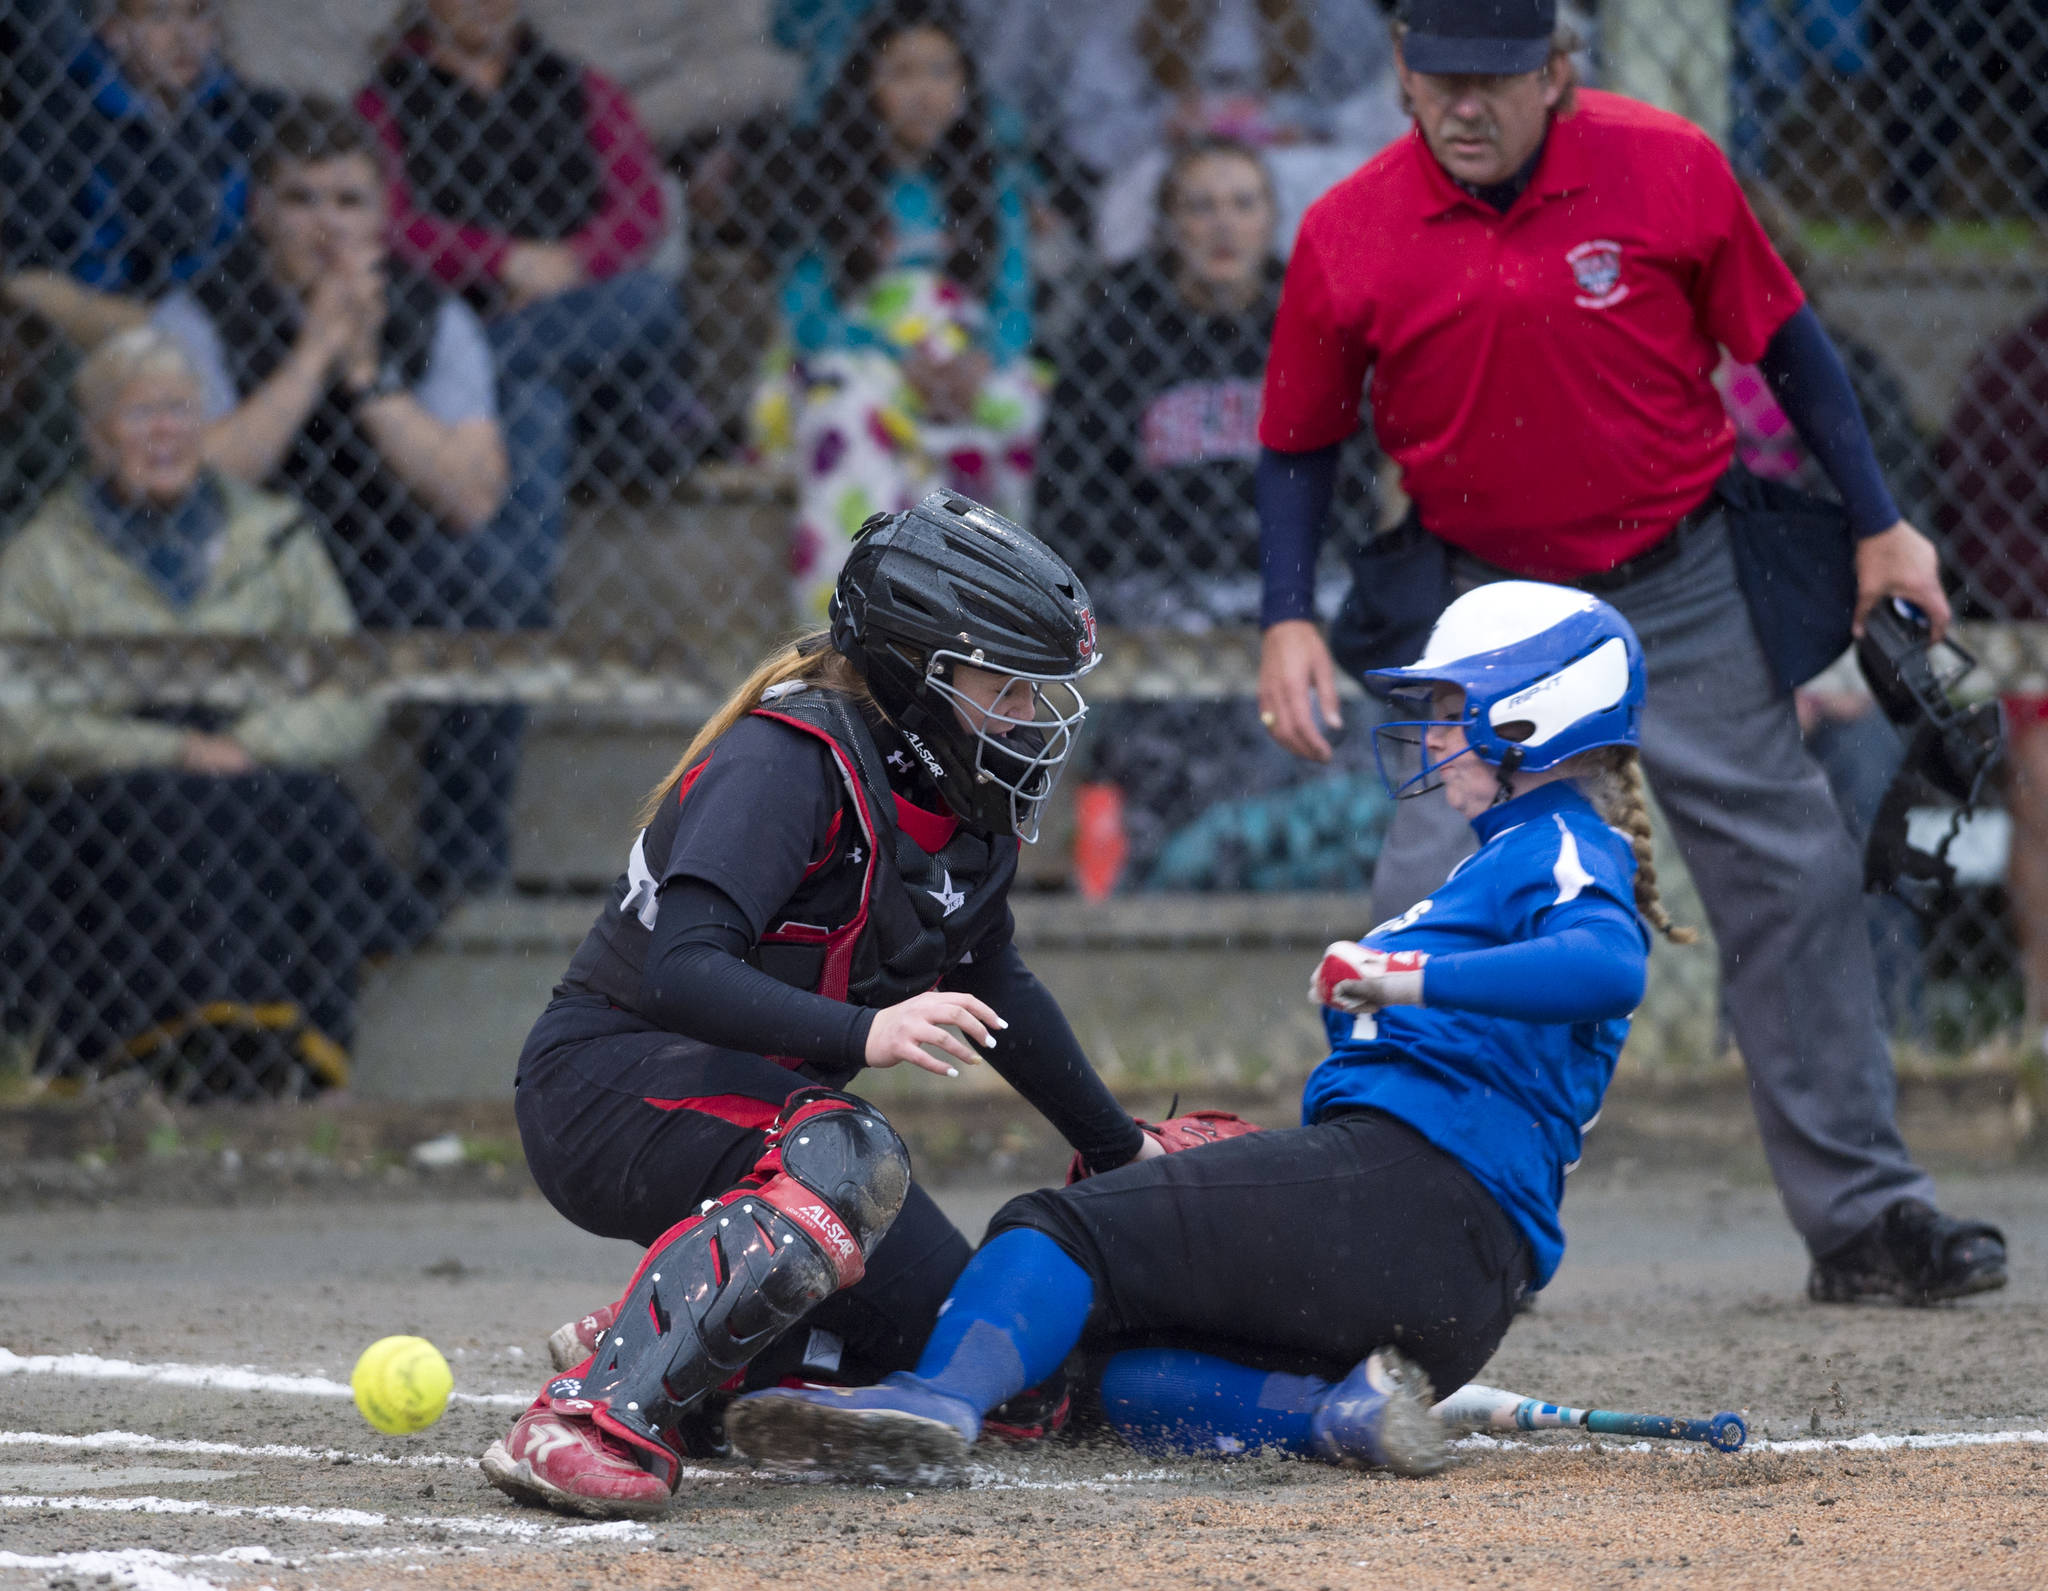 MICHAEL PENN | JUNEAU EMPIRE Thunder Mountain’s Rachel Macaulay, right, slides safely home as the ball gets away from Juneau-Douglas’ catcher Morgan Balovich during their game at Melvin Park on Friday.